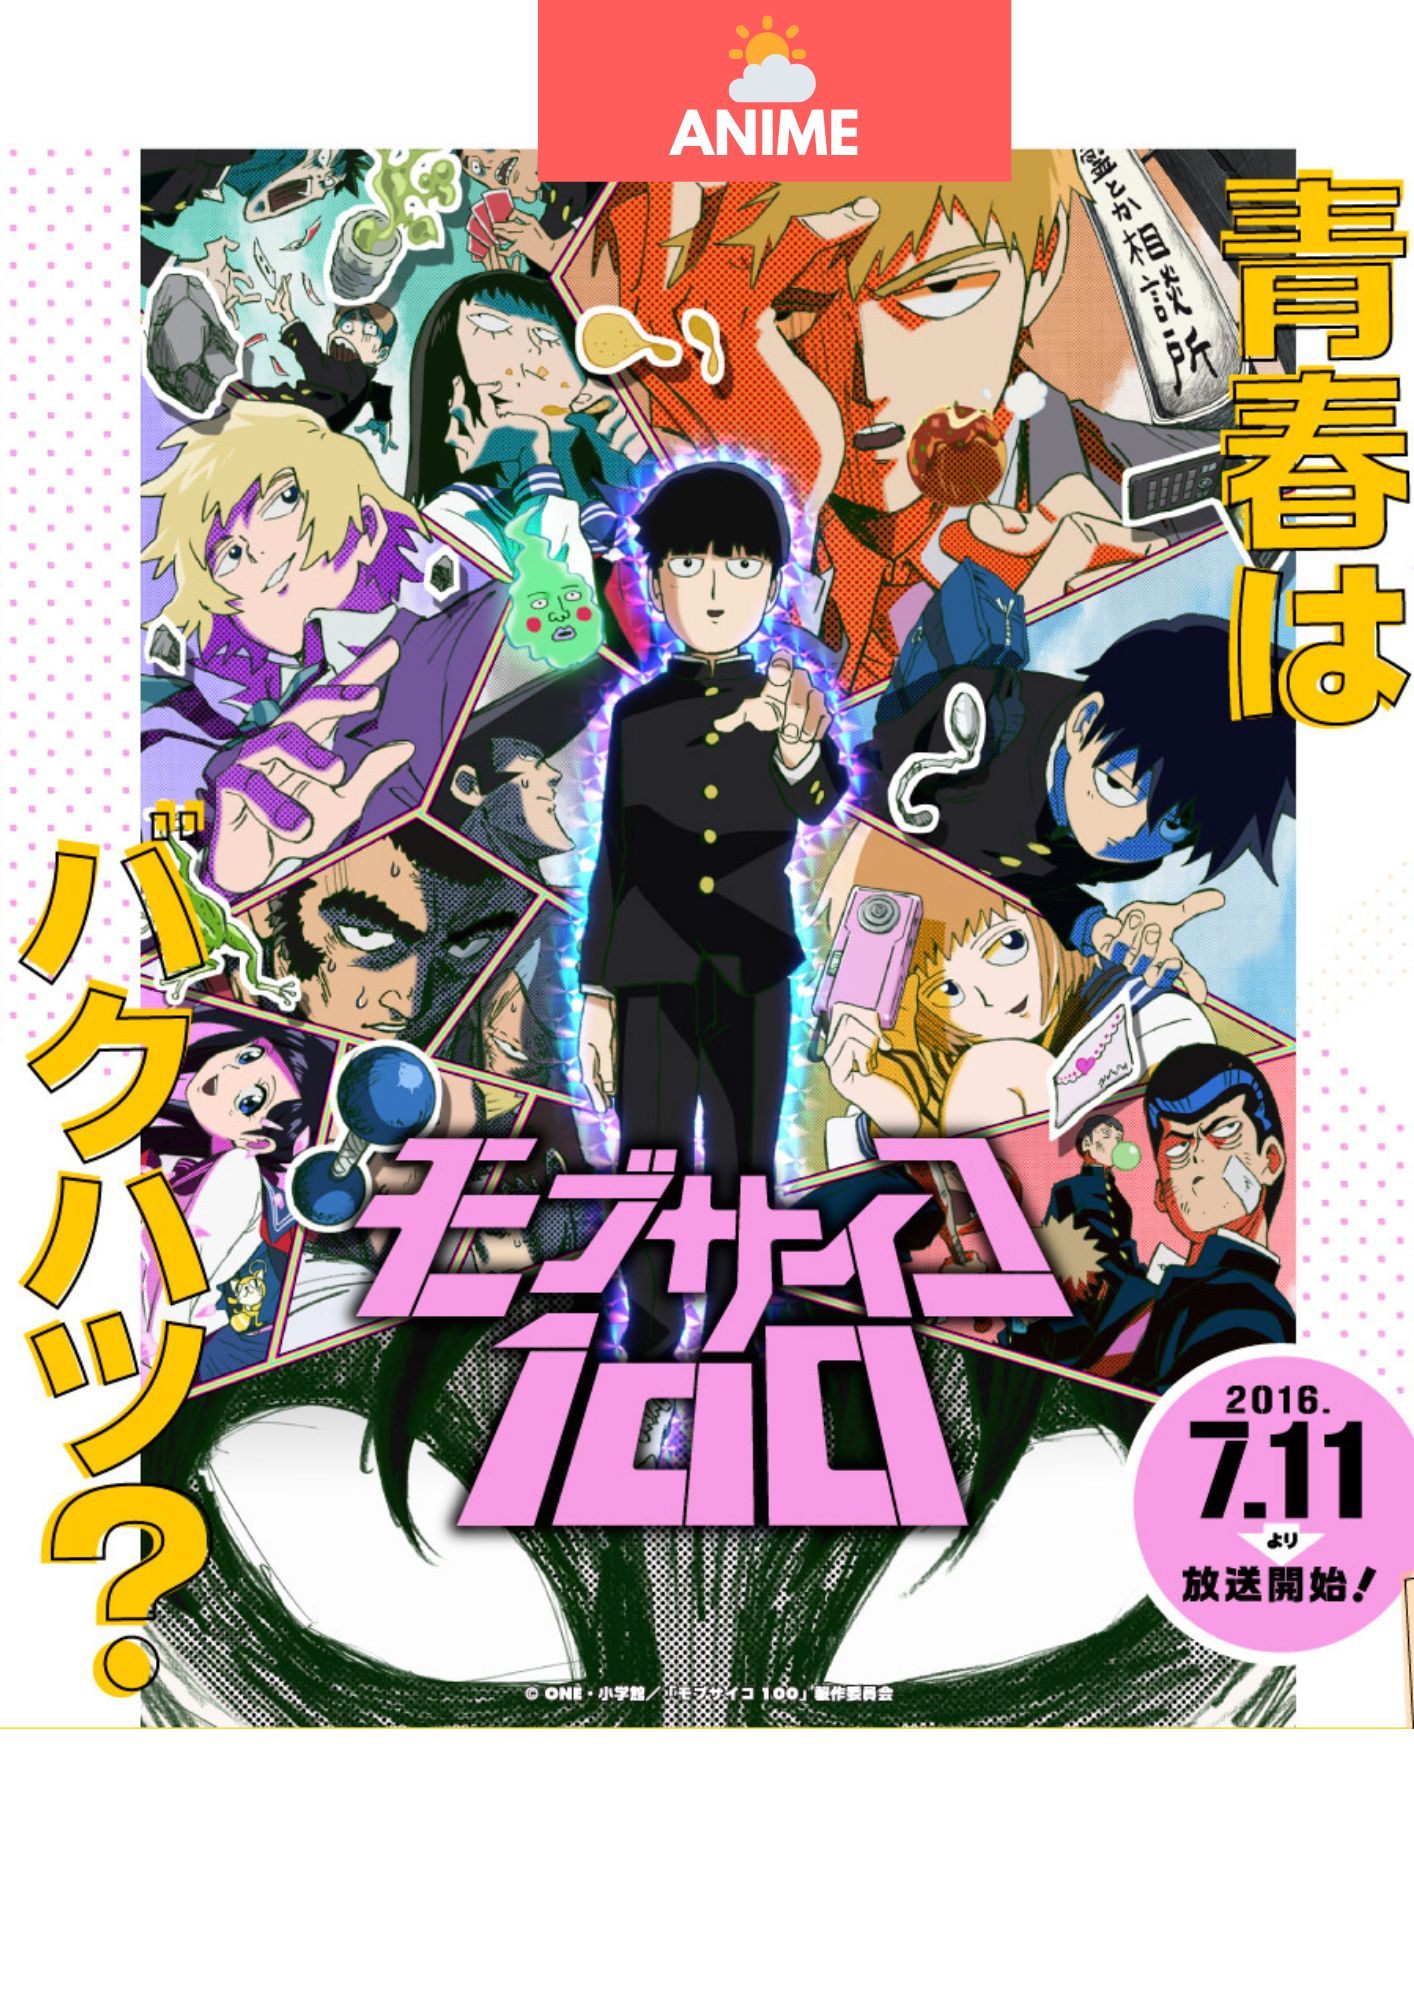 Mob Psycho 100 Anime Review & Thoughts - Geeky Travels & Fandoms